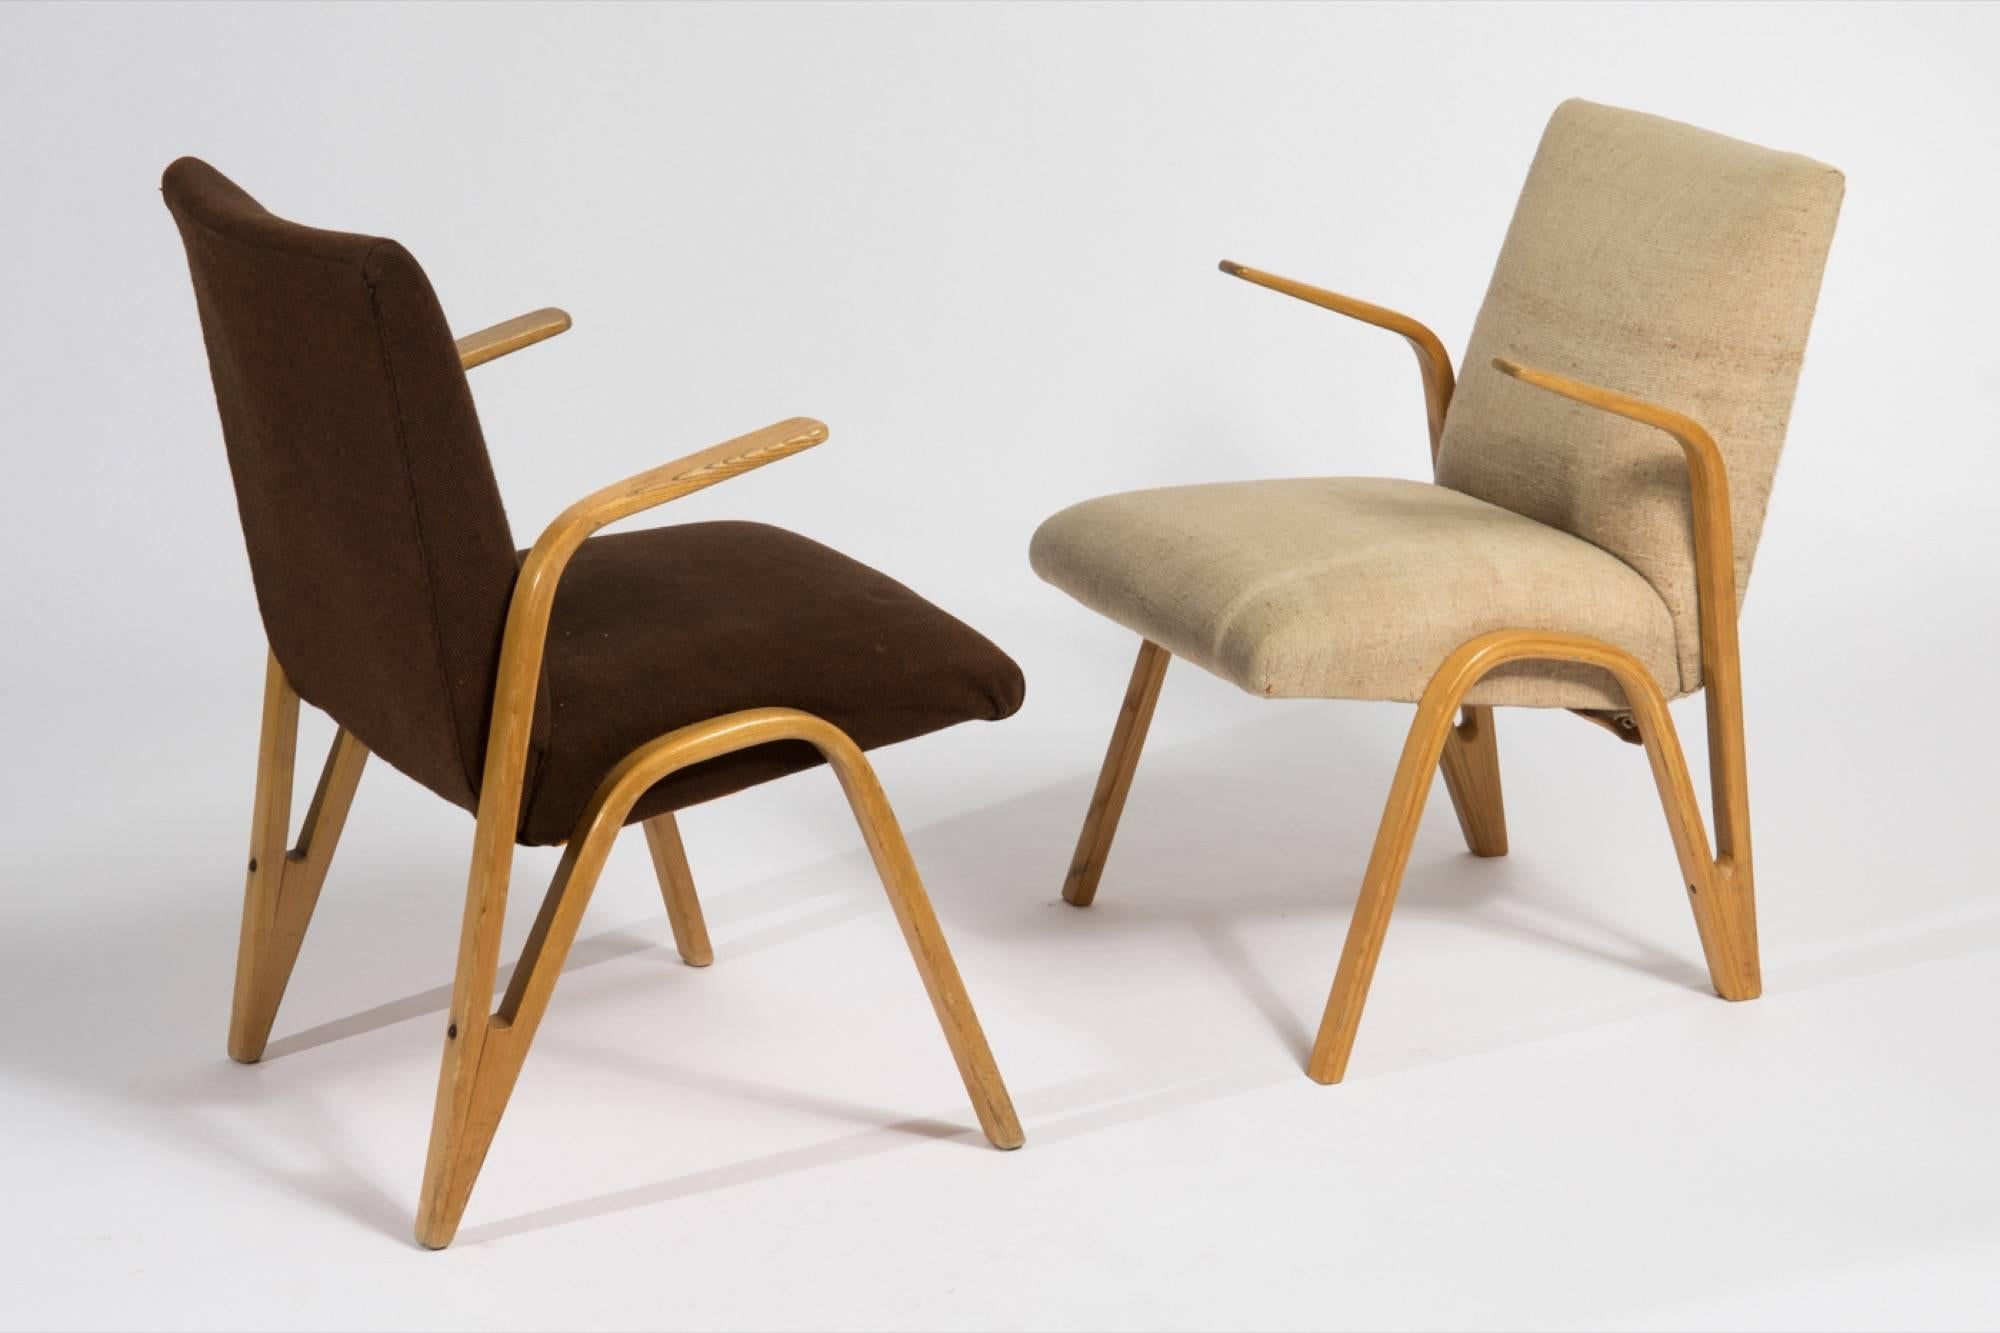 Pair of midcentury armchairs/cocktail chairs by Paul Bode for the Deutsche Federholzgesellschaft (German Spring Wood Company), circa 1955, made of molded plywood, upholstered with brown and beige cover.